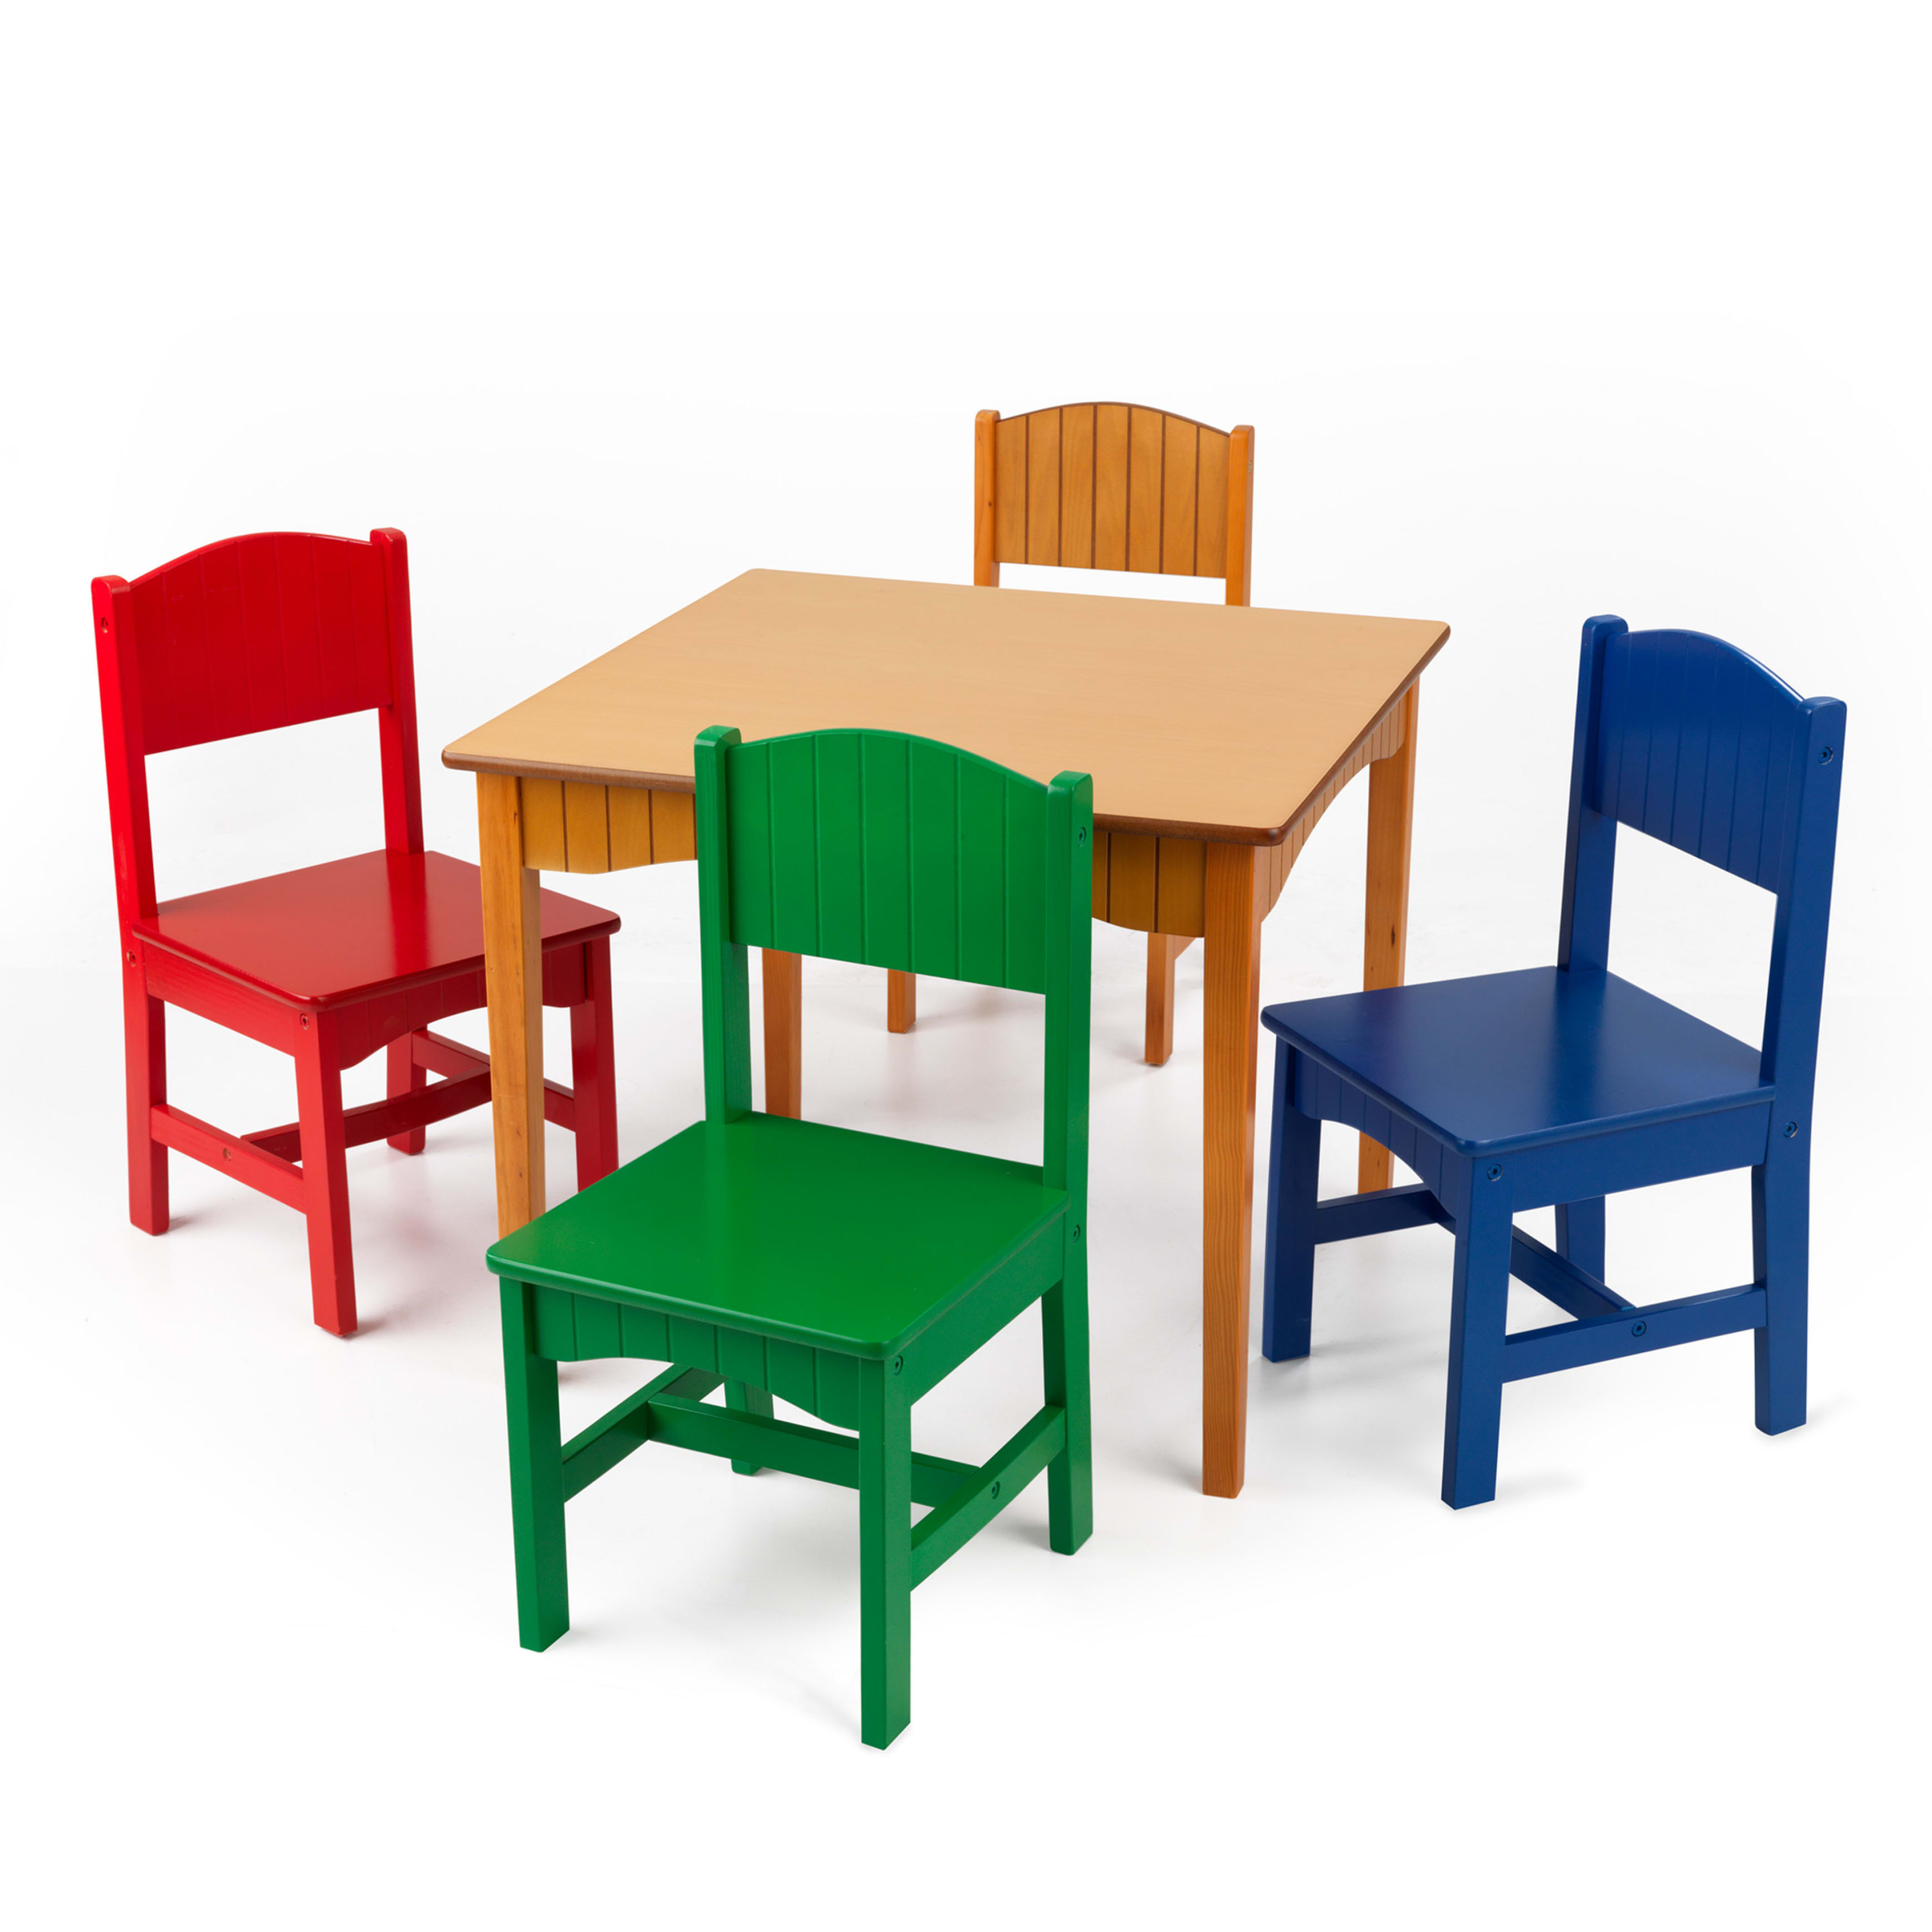 KidKraft Nantucket Wooden Table & 4 Chair Set, Primary Colors - image 1 of 7